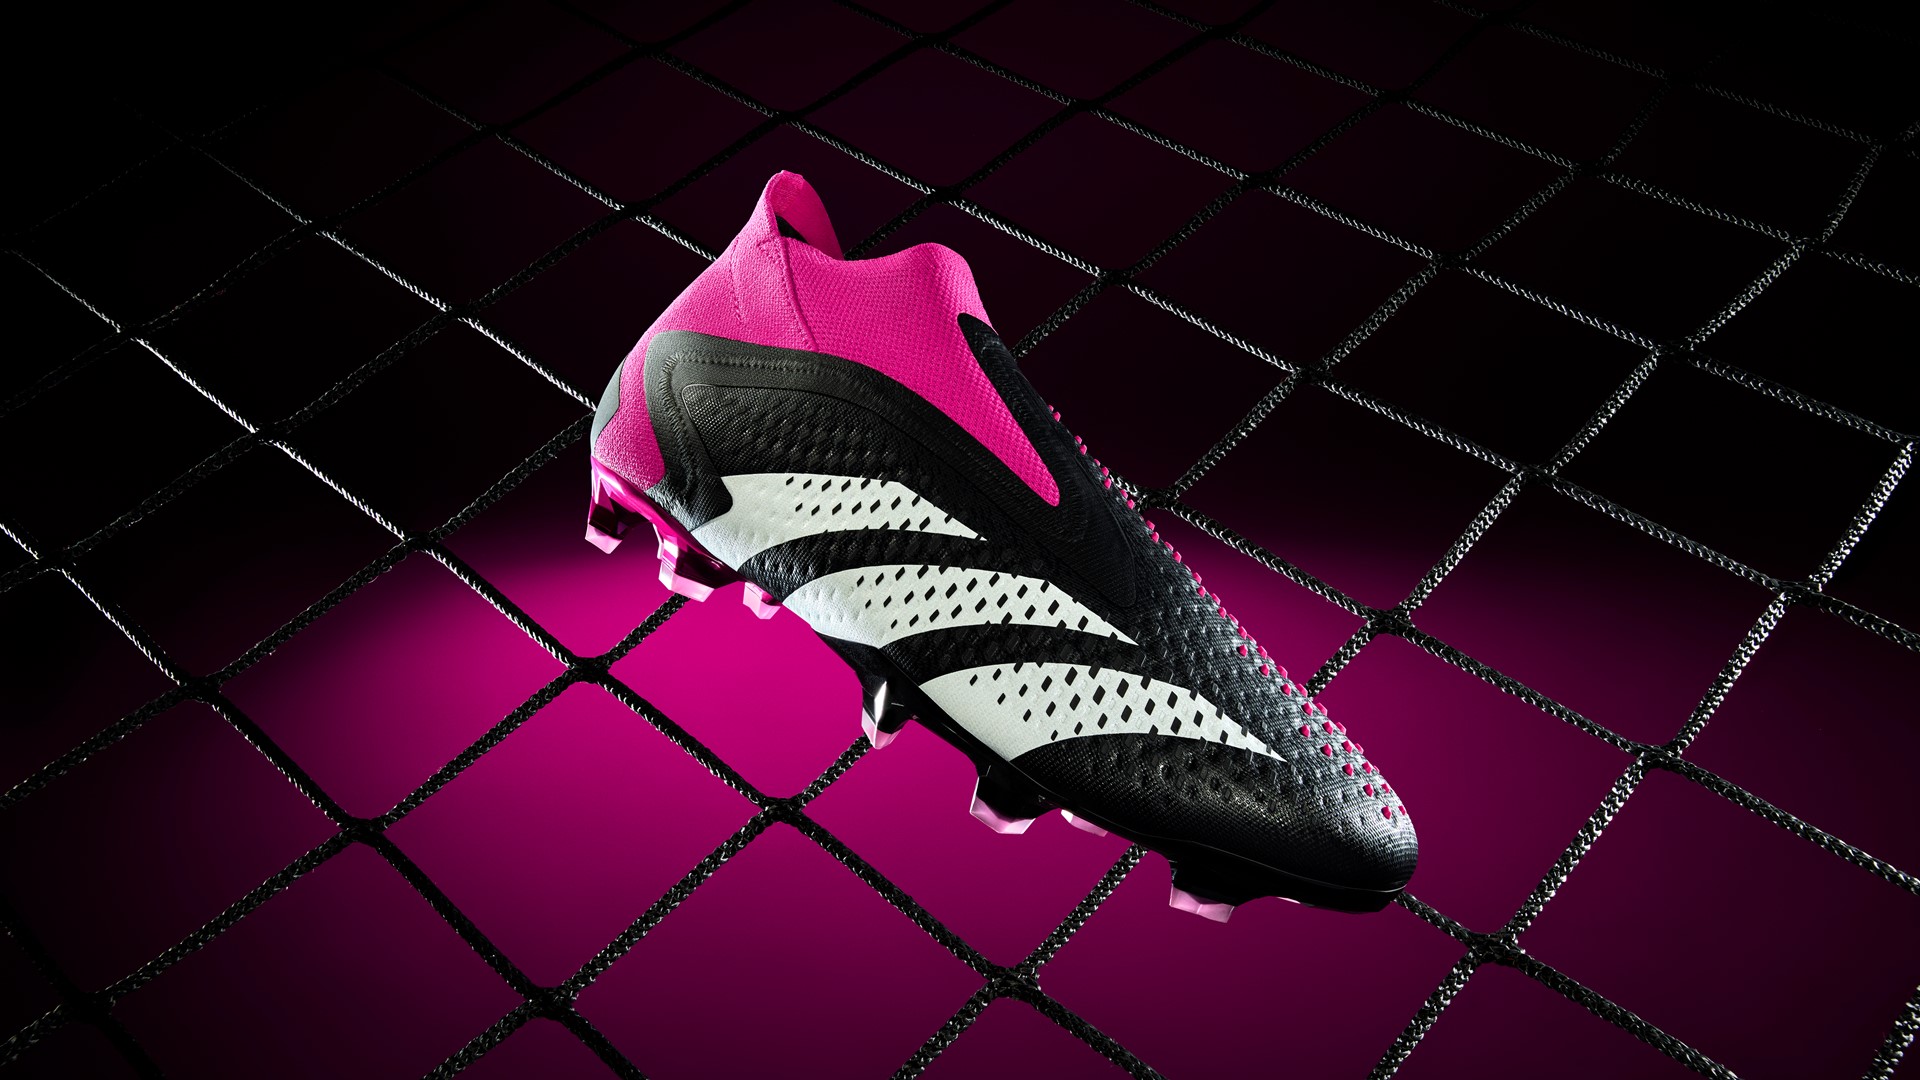 Krijger trechter Voorkeursbehandeling adidas Takes On-Pitch Accuracy to The Next Level, With the All-New Predator  Accuracy - The Latest Member of The Predator Franchise